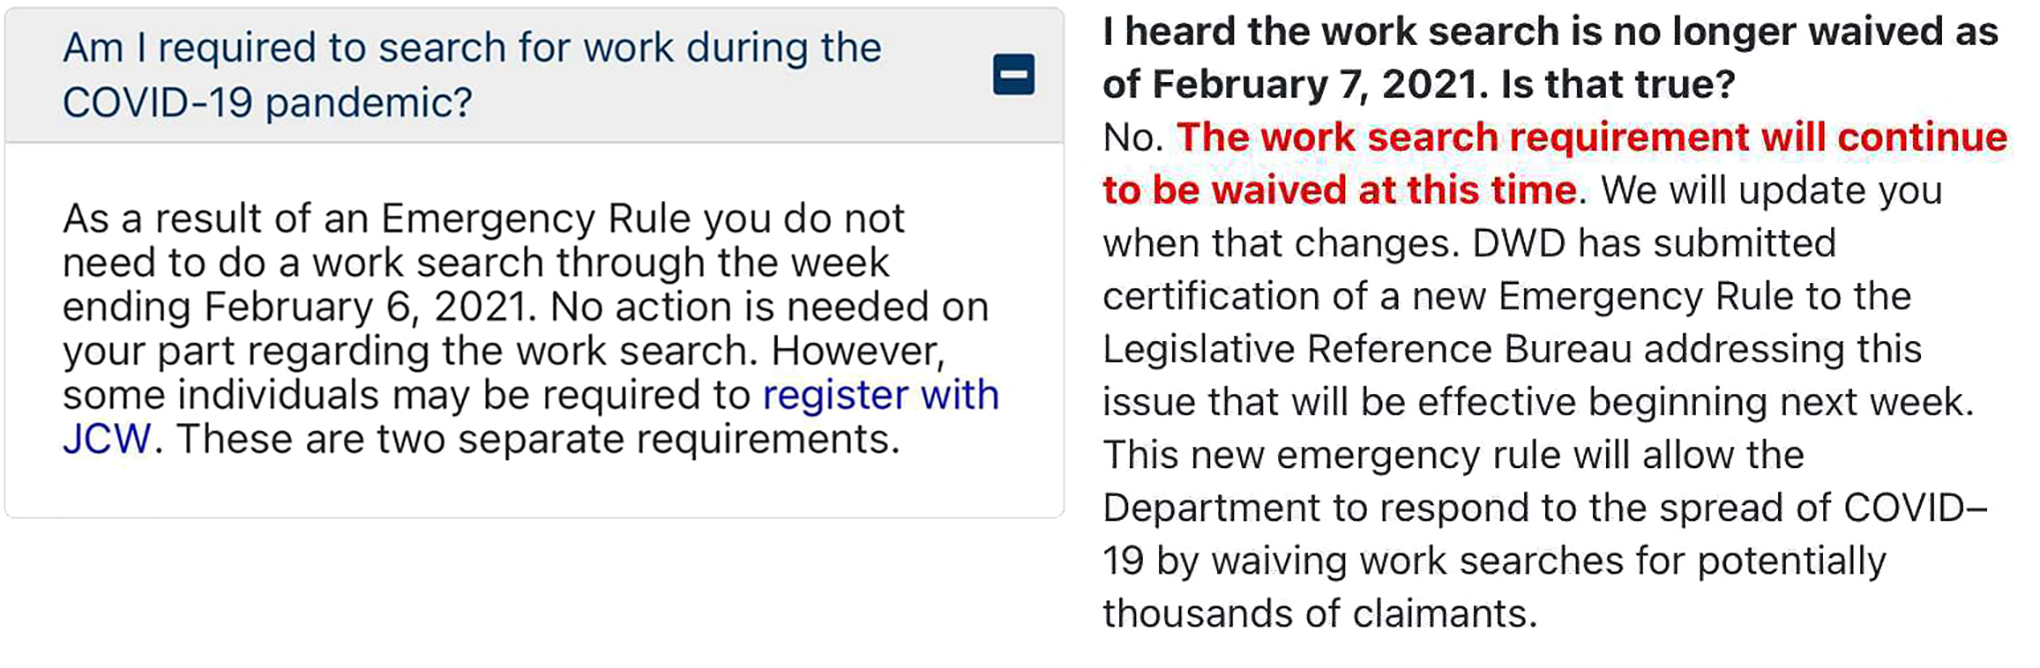 Screenshots from the state Department of Workforce Development's website